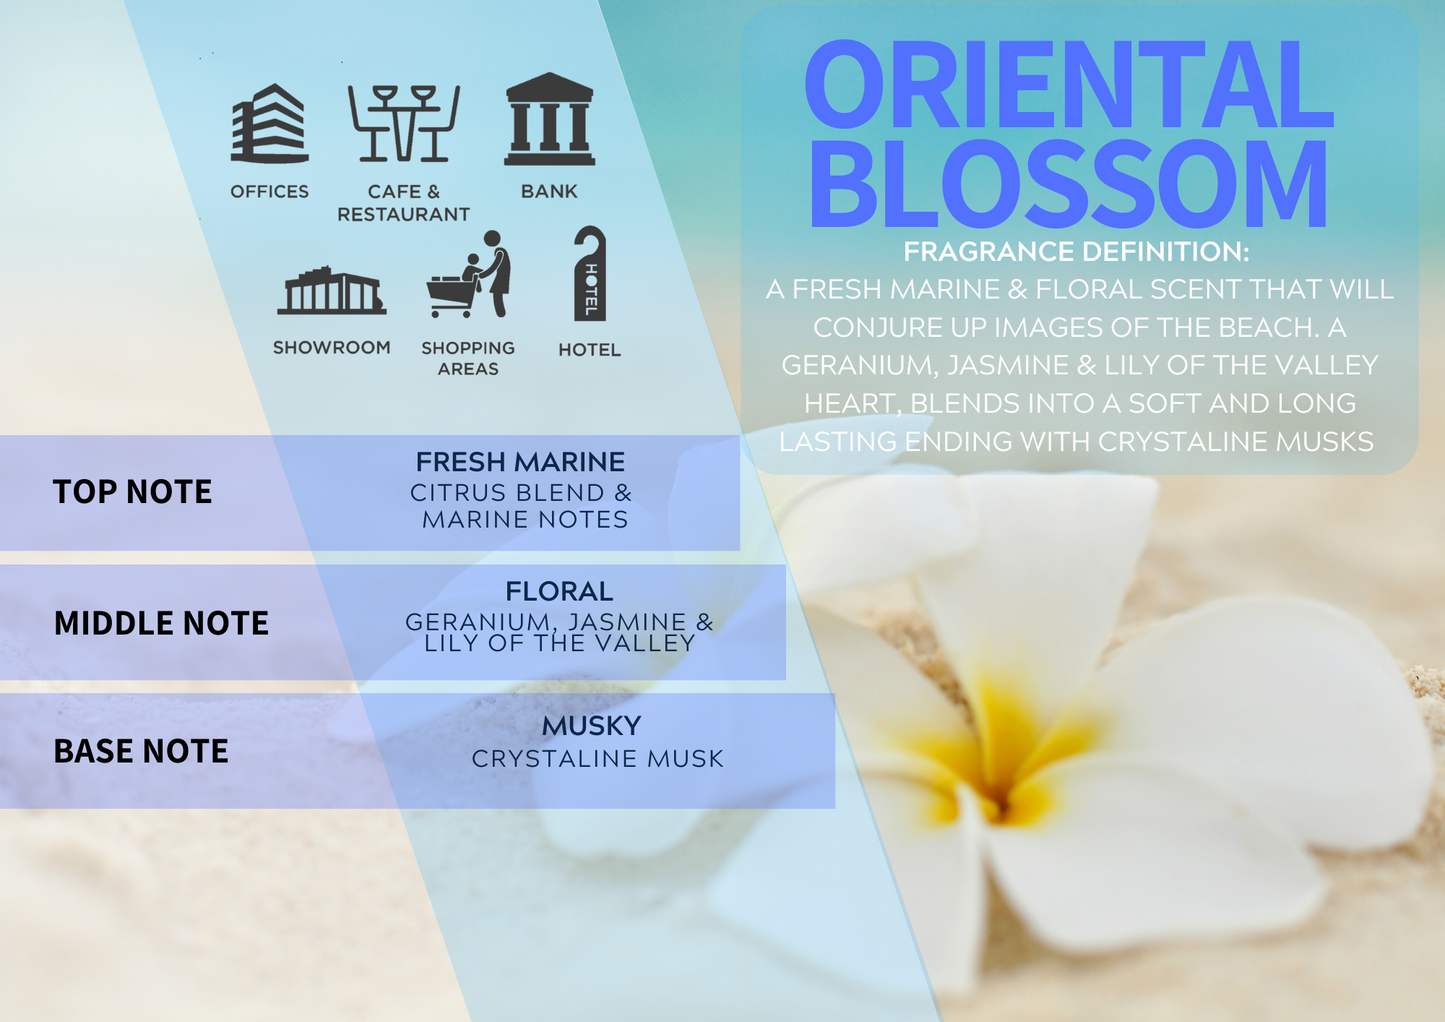 An Image describing Oriental Blossom Fragrance: A FRESH MARINE & FLORAL SCENT THAT WILL CONJURE UP IMAGES OF THE BEACH. A GERANIUM, JASMINE & LILY OF THE VALLEY HEART, BLENDS INTO A SOFT AND LONG LASTING ENDING WITH CRYSTALINE MUSKS 